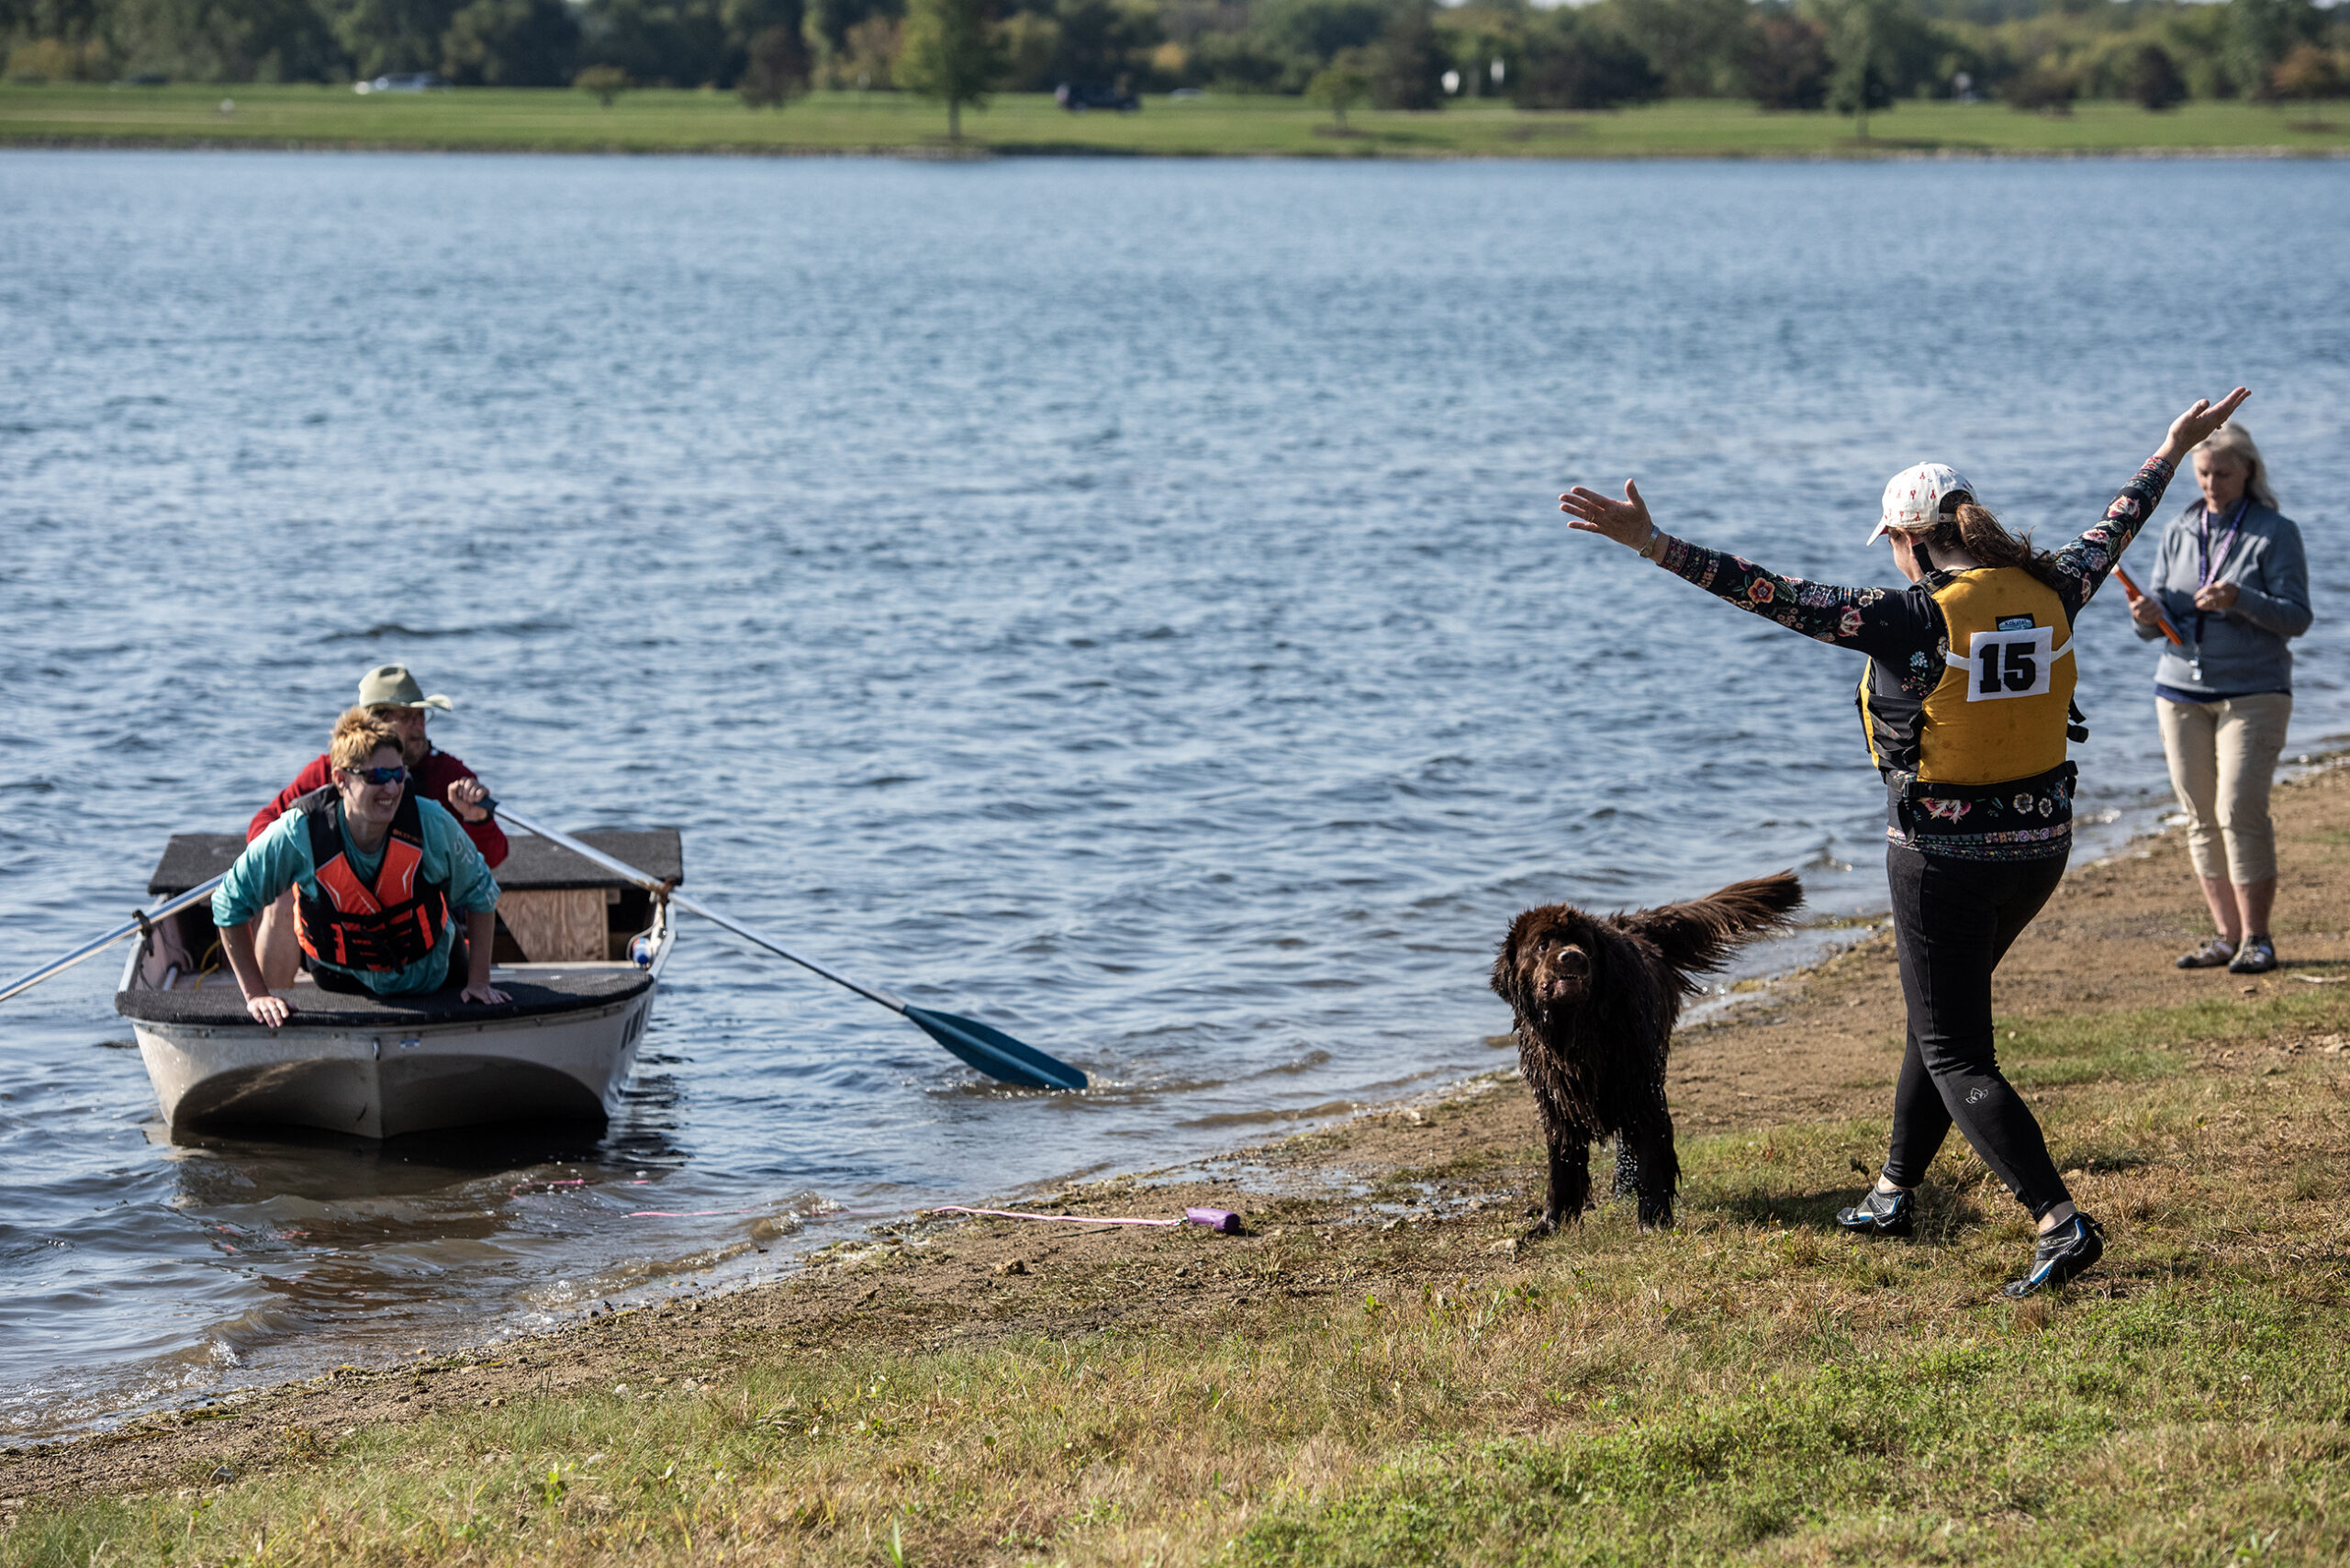 A dog stands on the shore of a lake as a woman approaches with her arms raised excitedly.